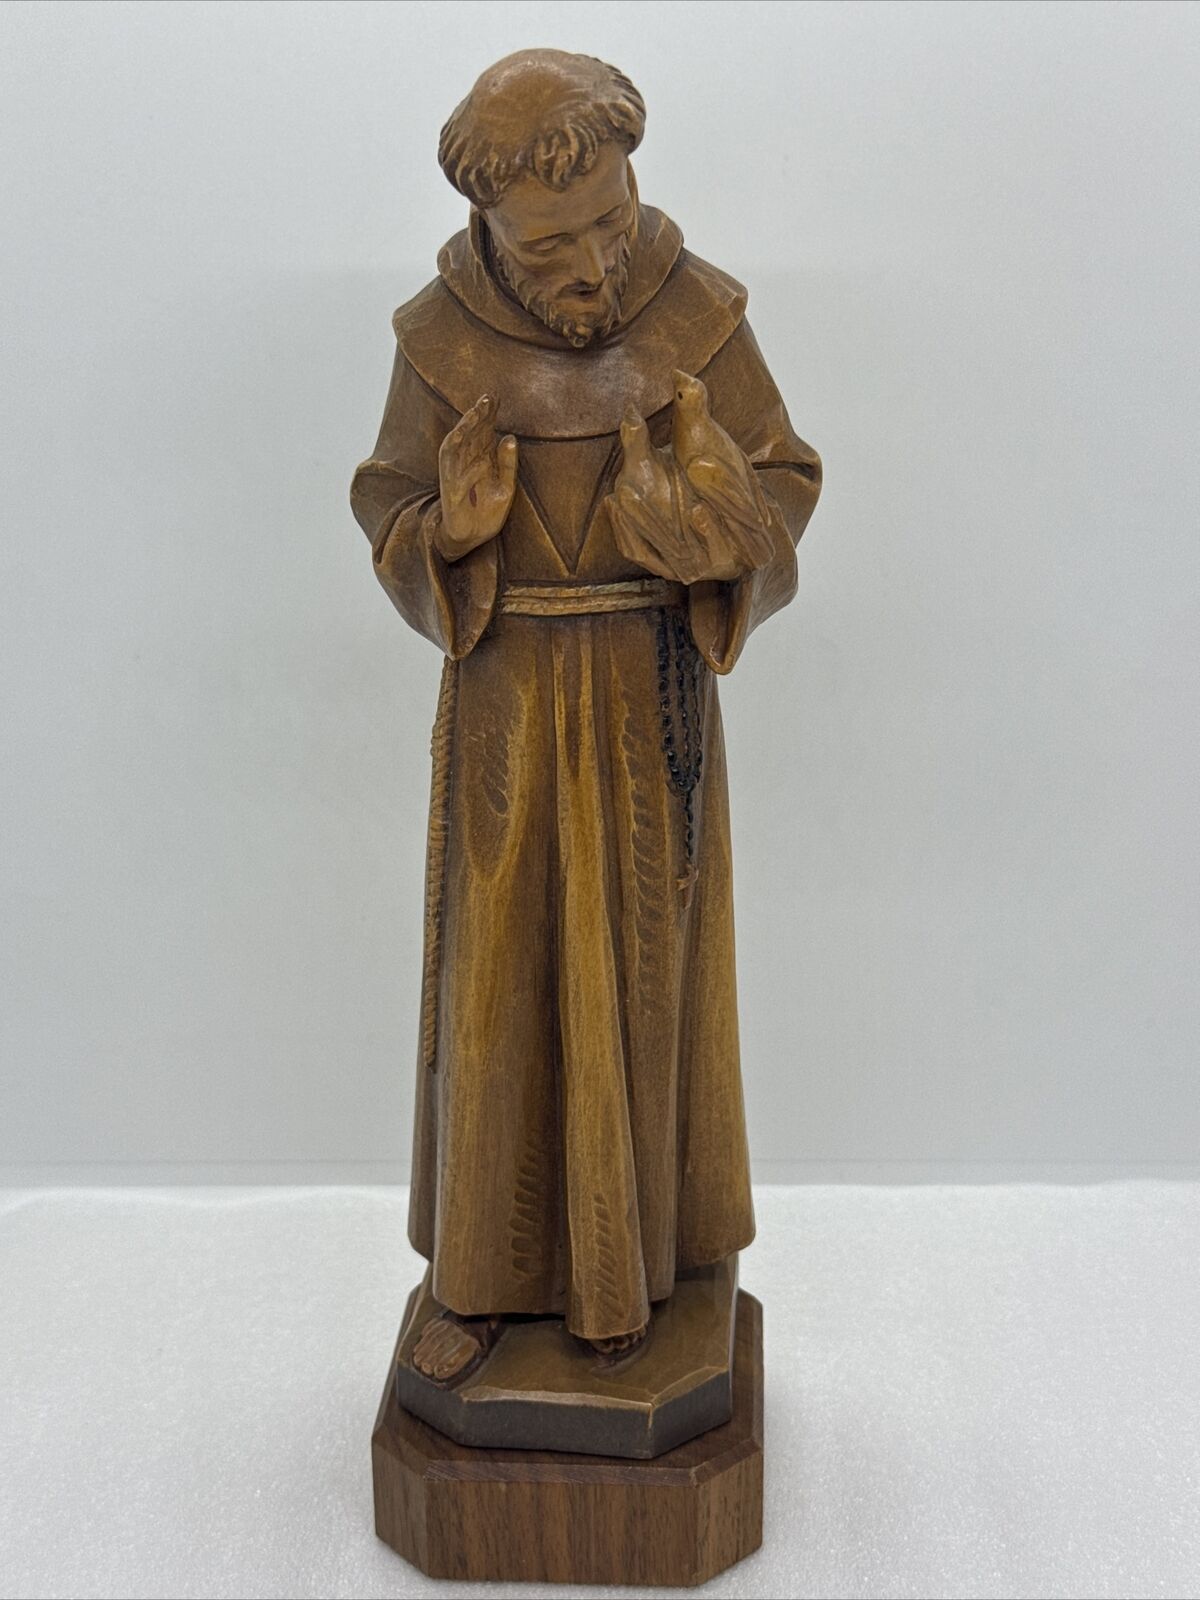 Rare Vintage ANRI Italy Saint Francis Of Assisi Wood Carving Sculpture 10.75”H